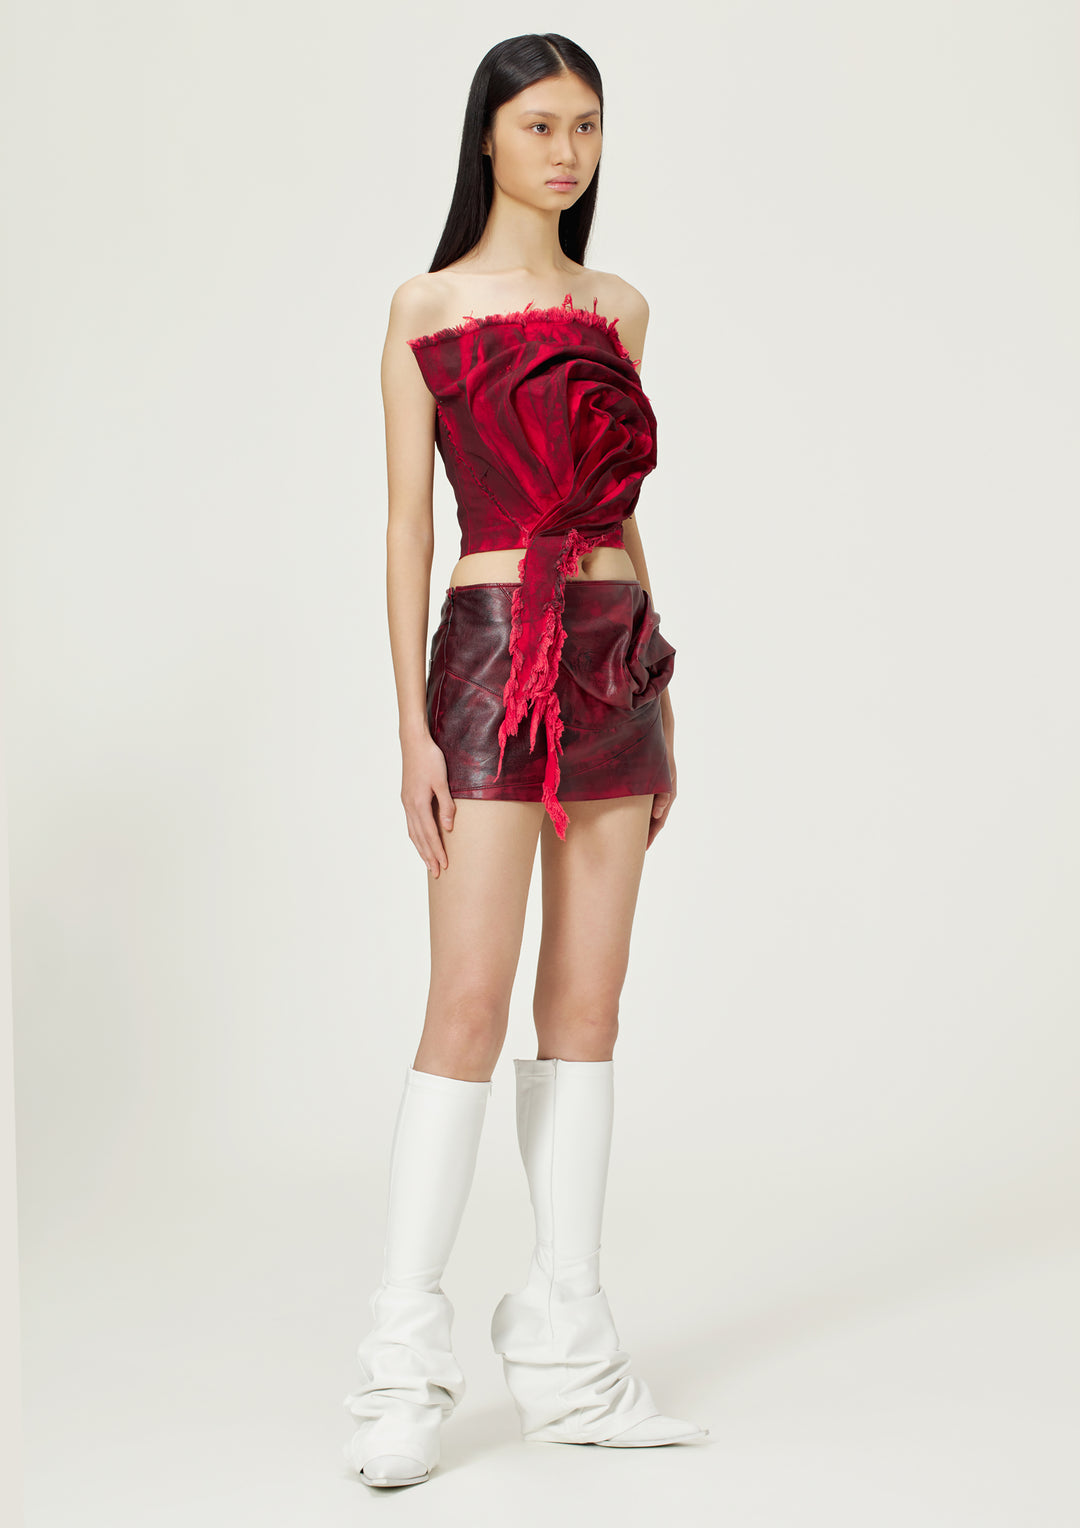 Floral Sheath with Red Ruffles